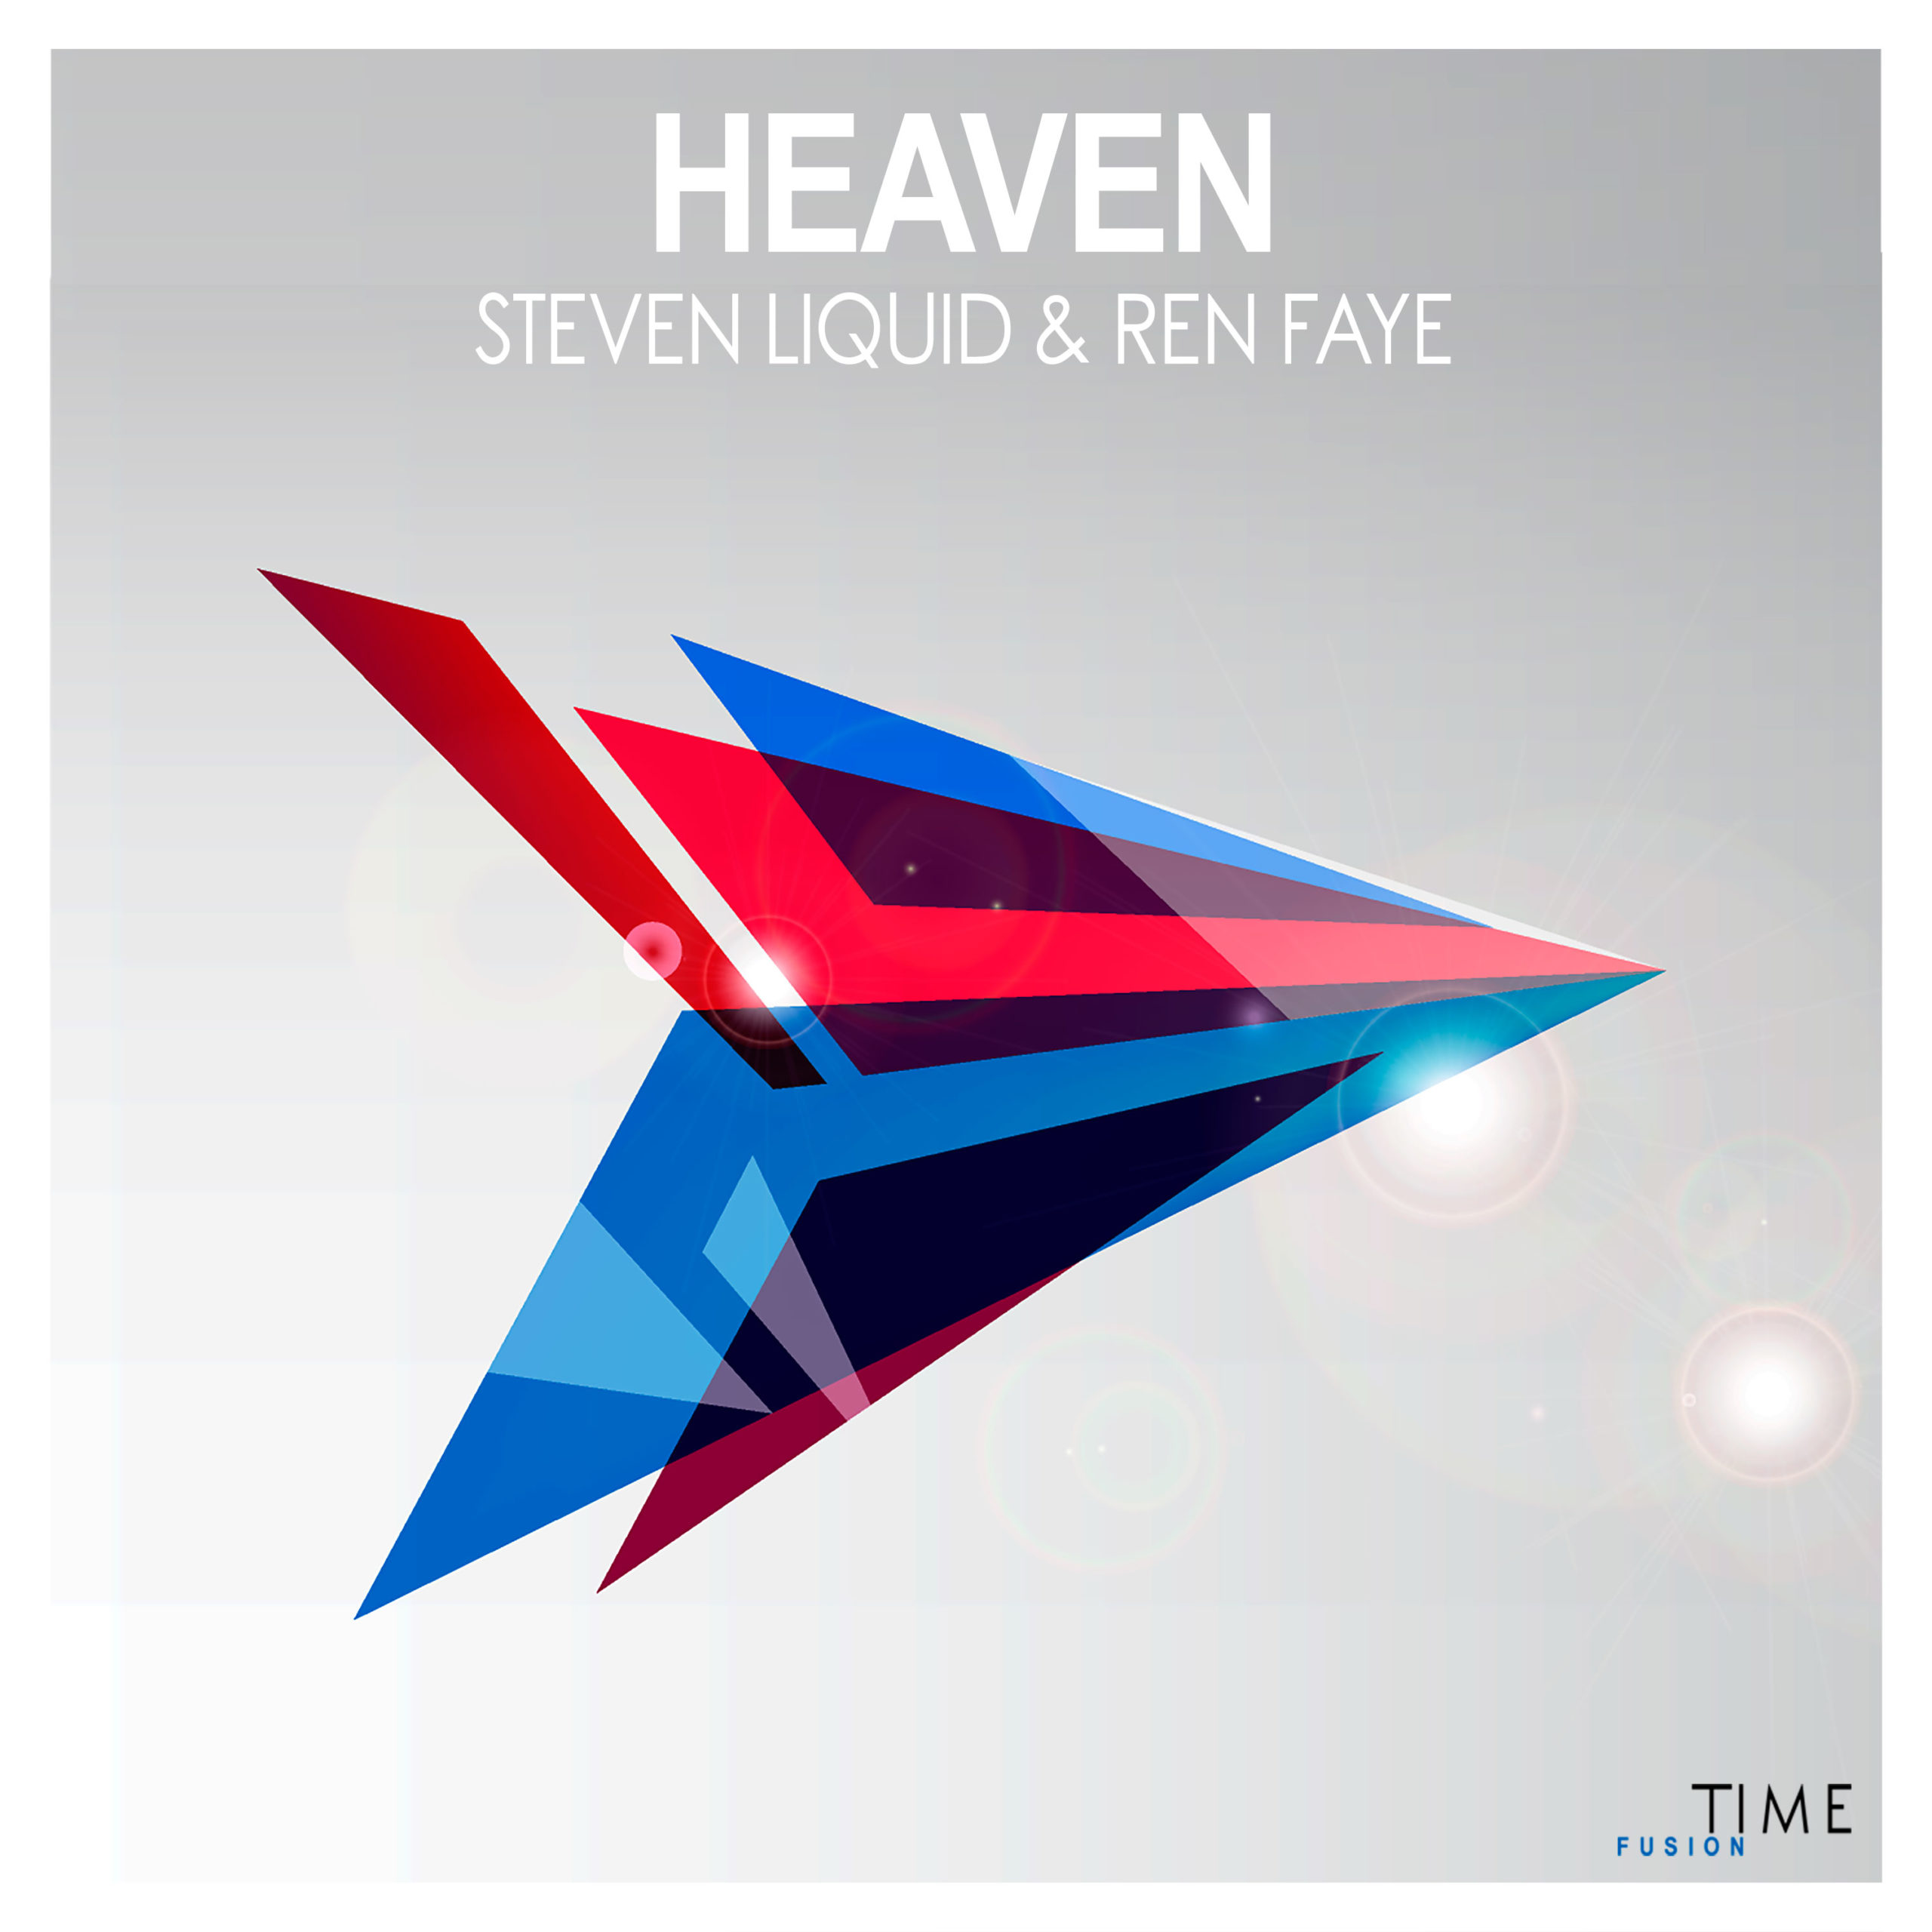 https://www.ultimate-house-records.com/wp-content/uploads/2022/09/tf160-Heaven-Cover_3000px_web-scaled.jpg